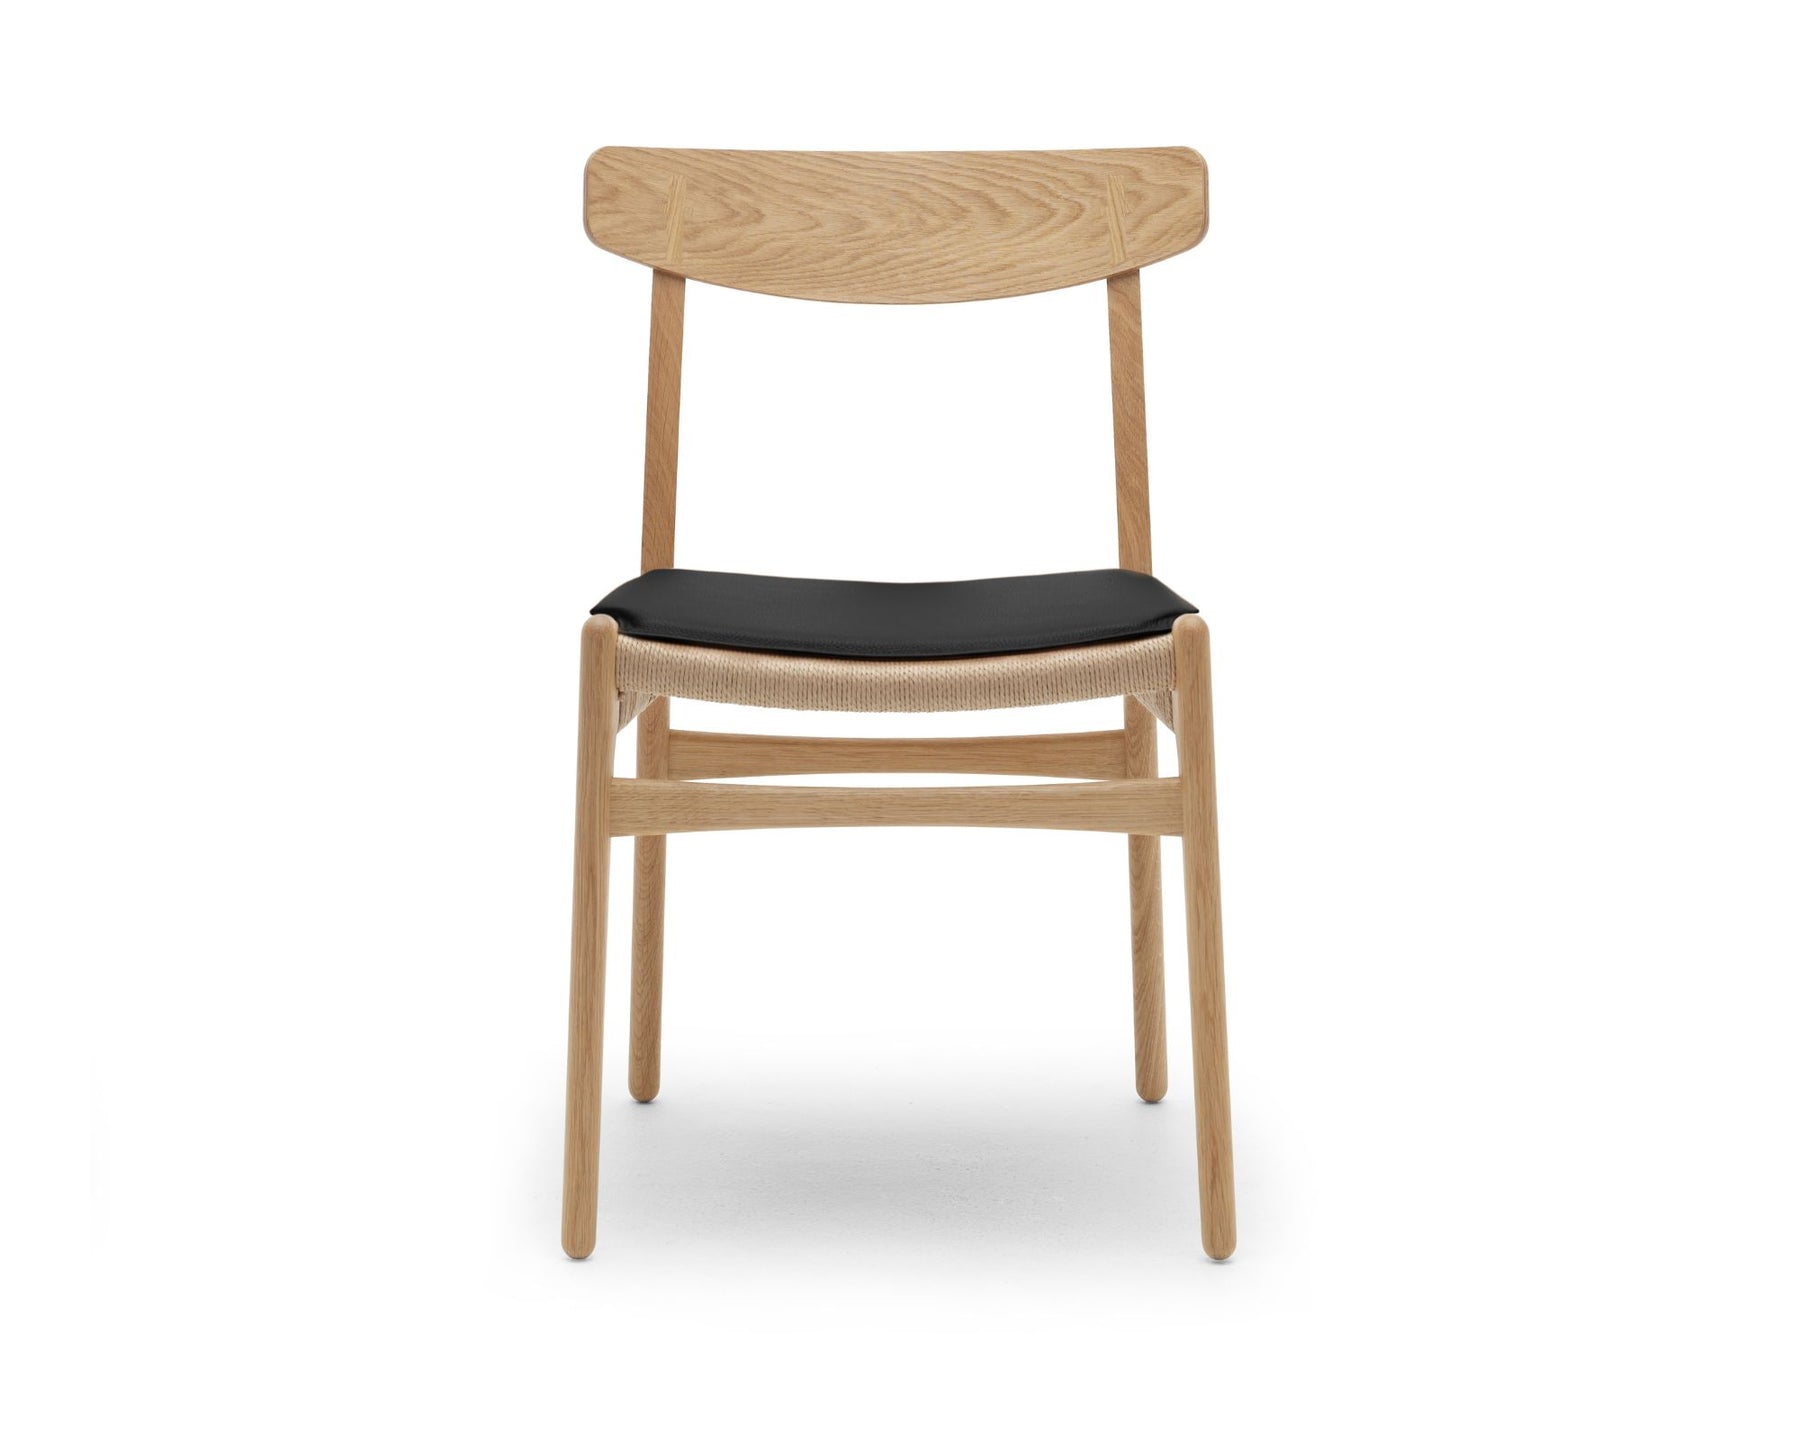 Wood Dining Chair with Seat Cushion | DSHOP